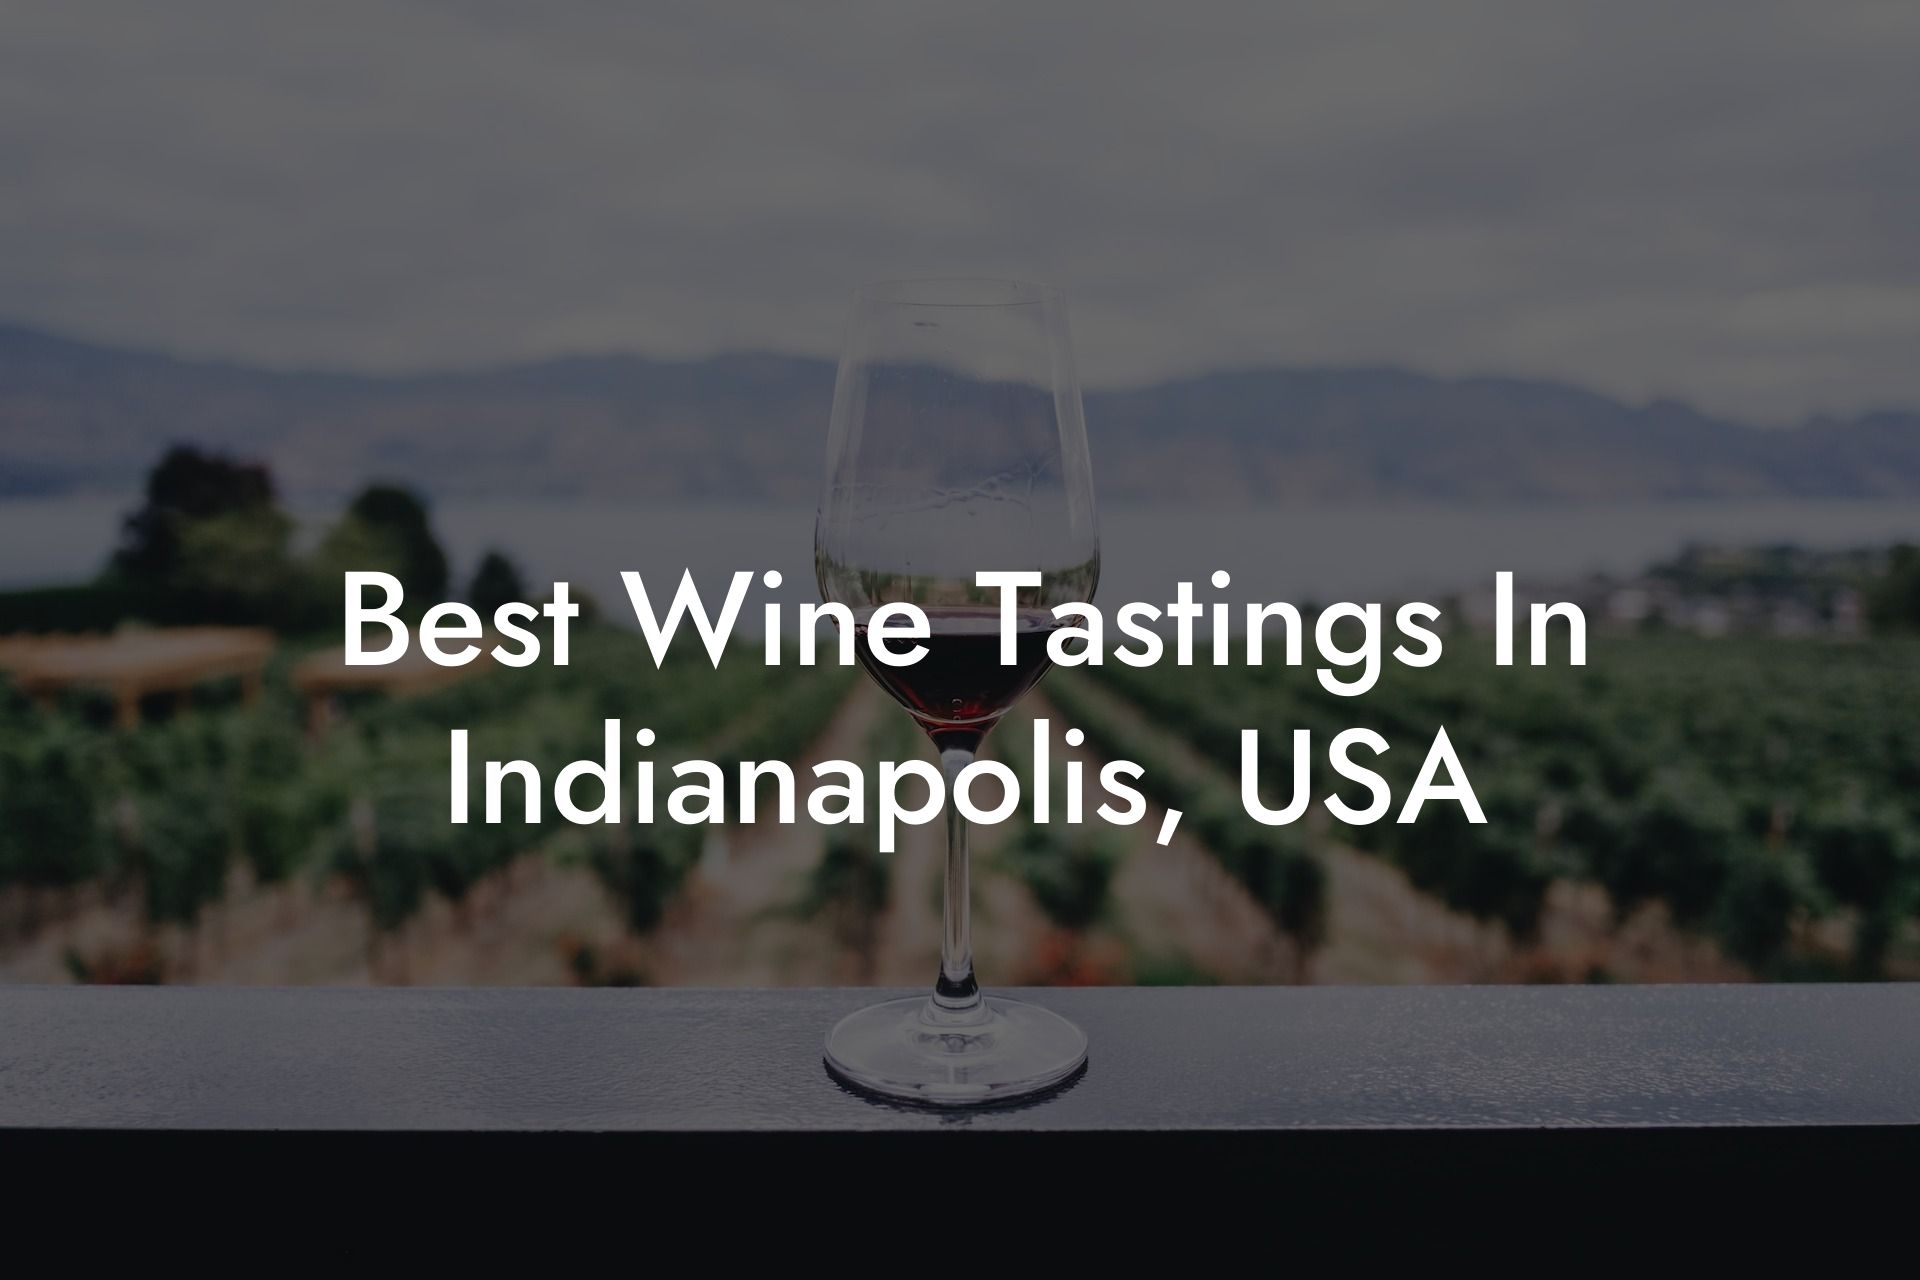 Best Wine Tastings In Indianapolis, USA